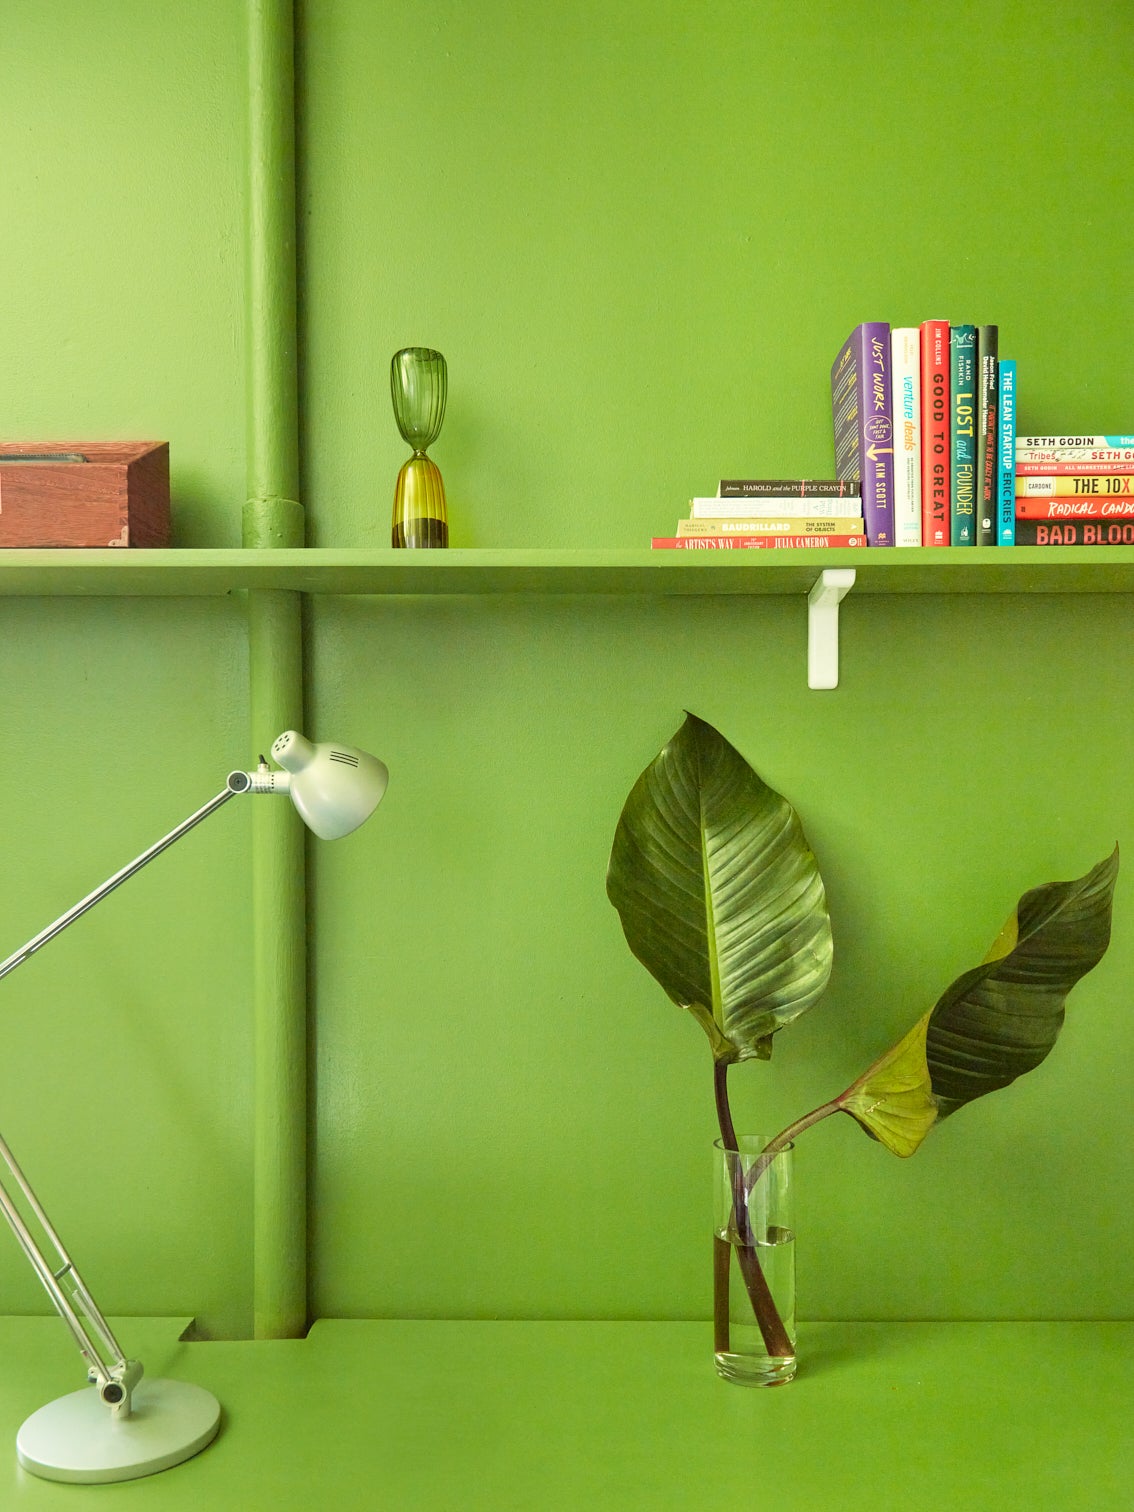 lamp and plant in front of shelf